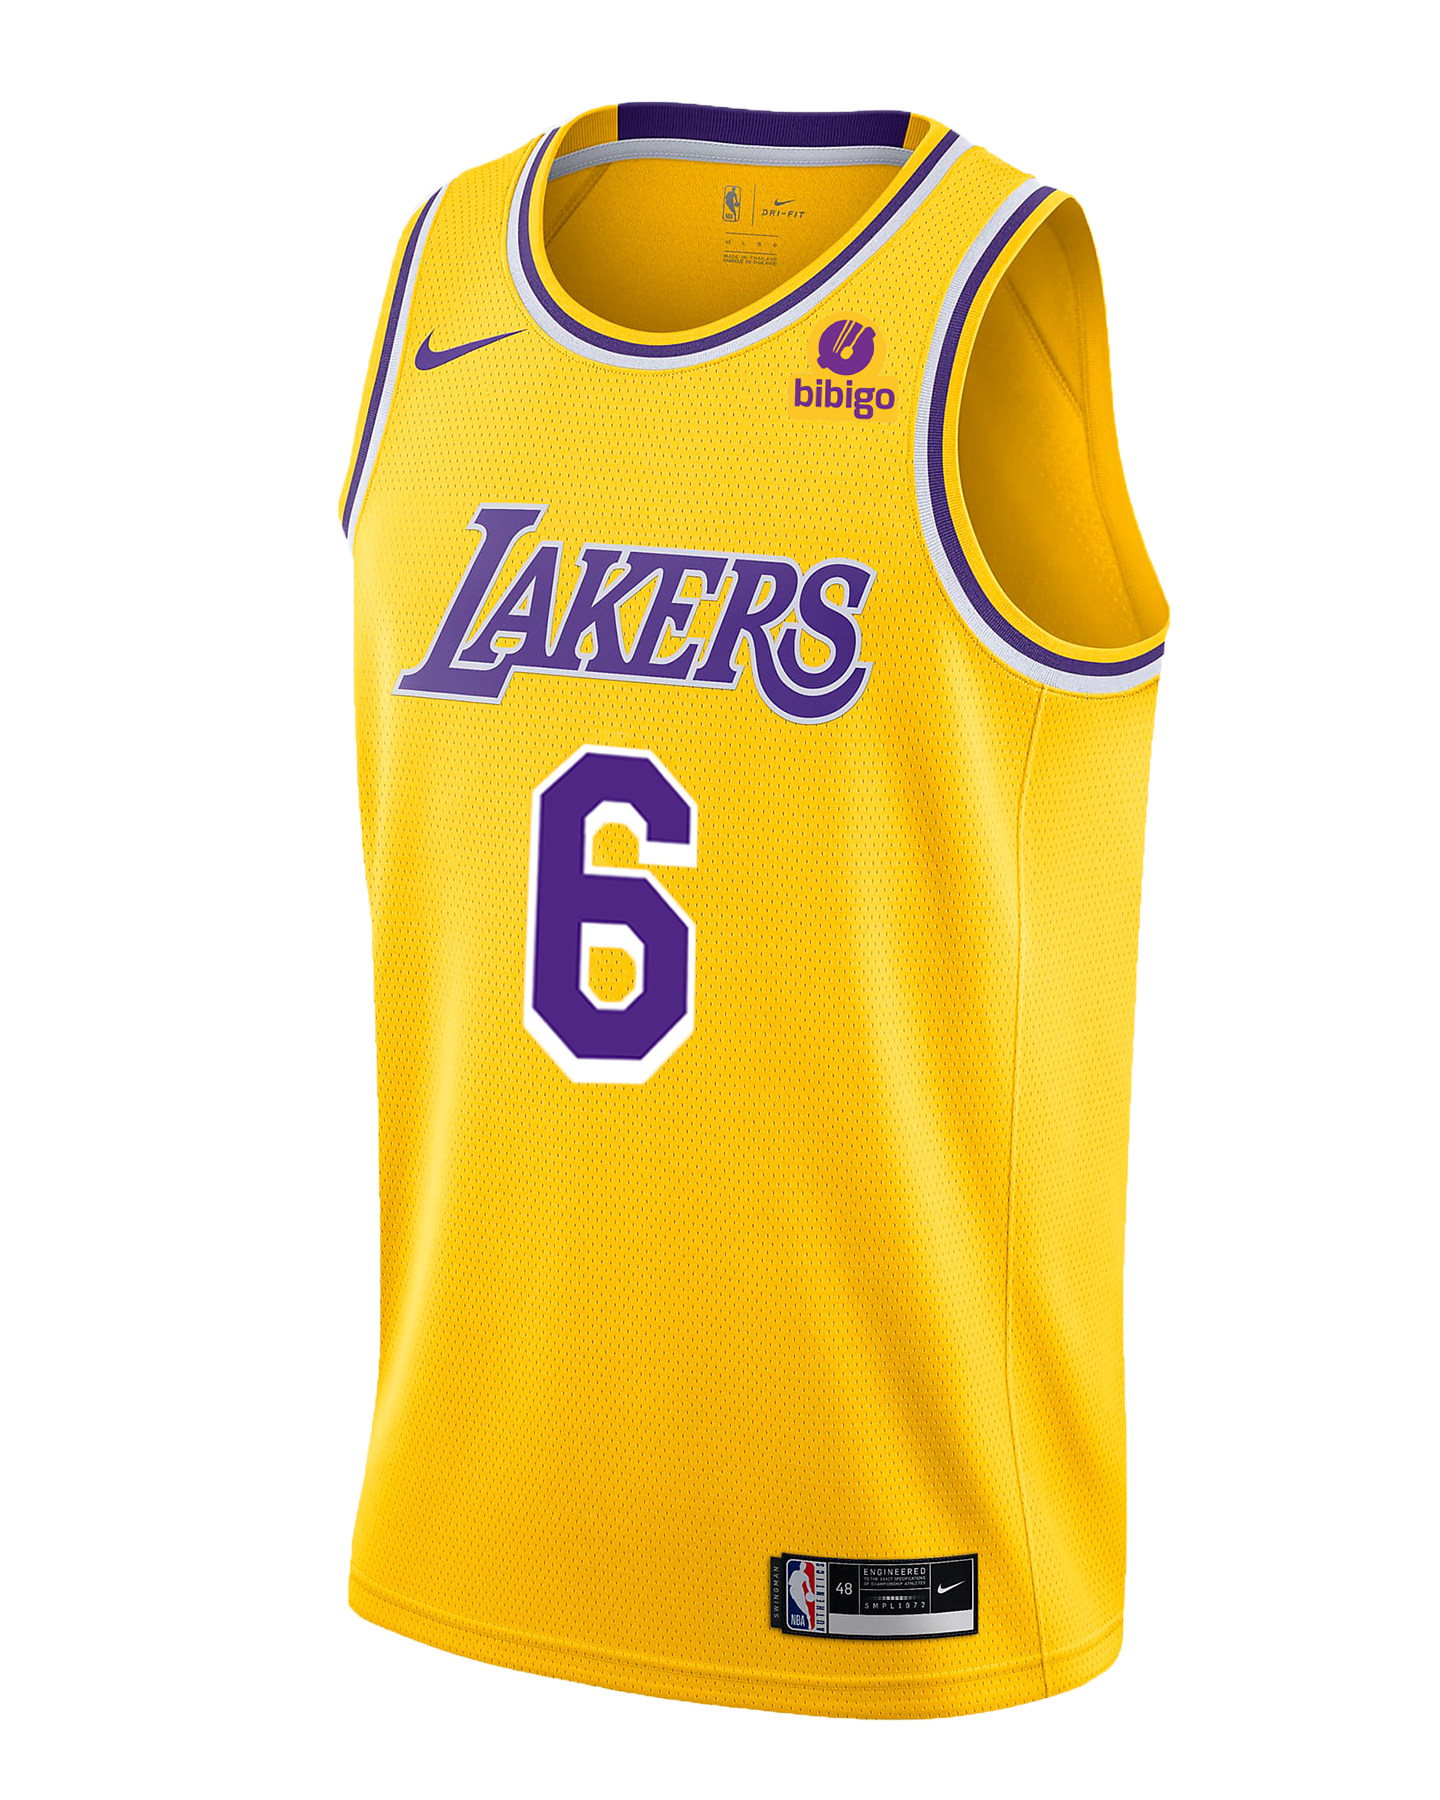 Shop Lebron James Jersey Number 6 with great discounts and prices